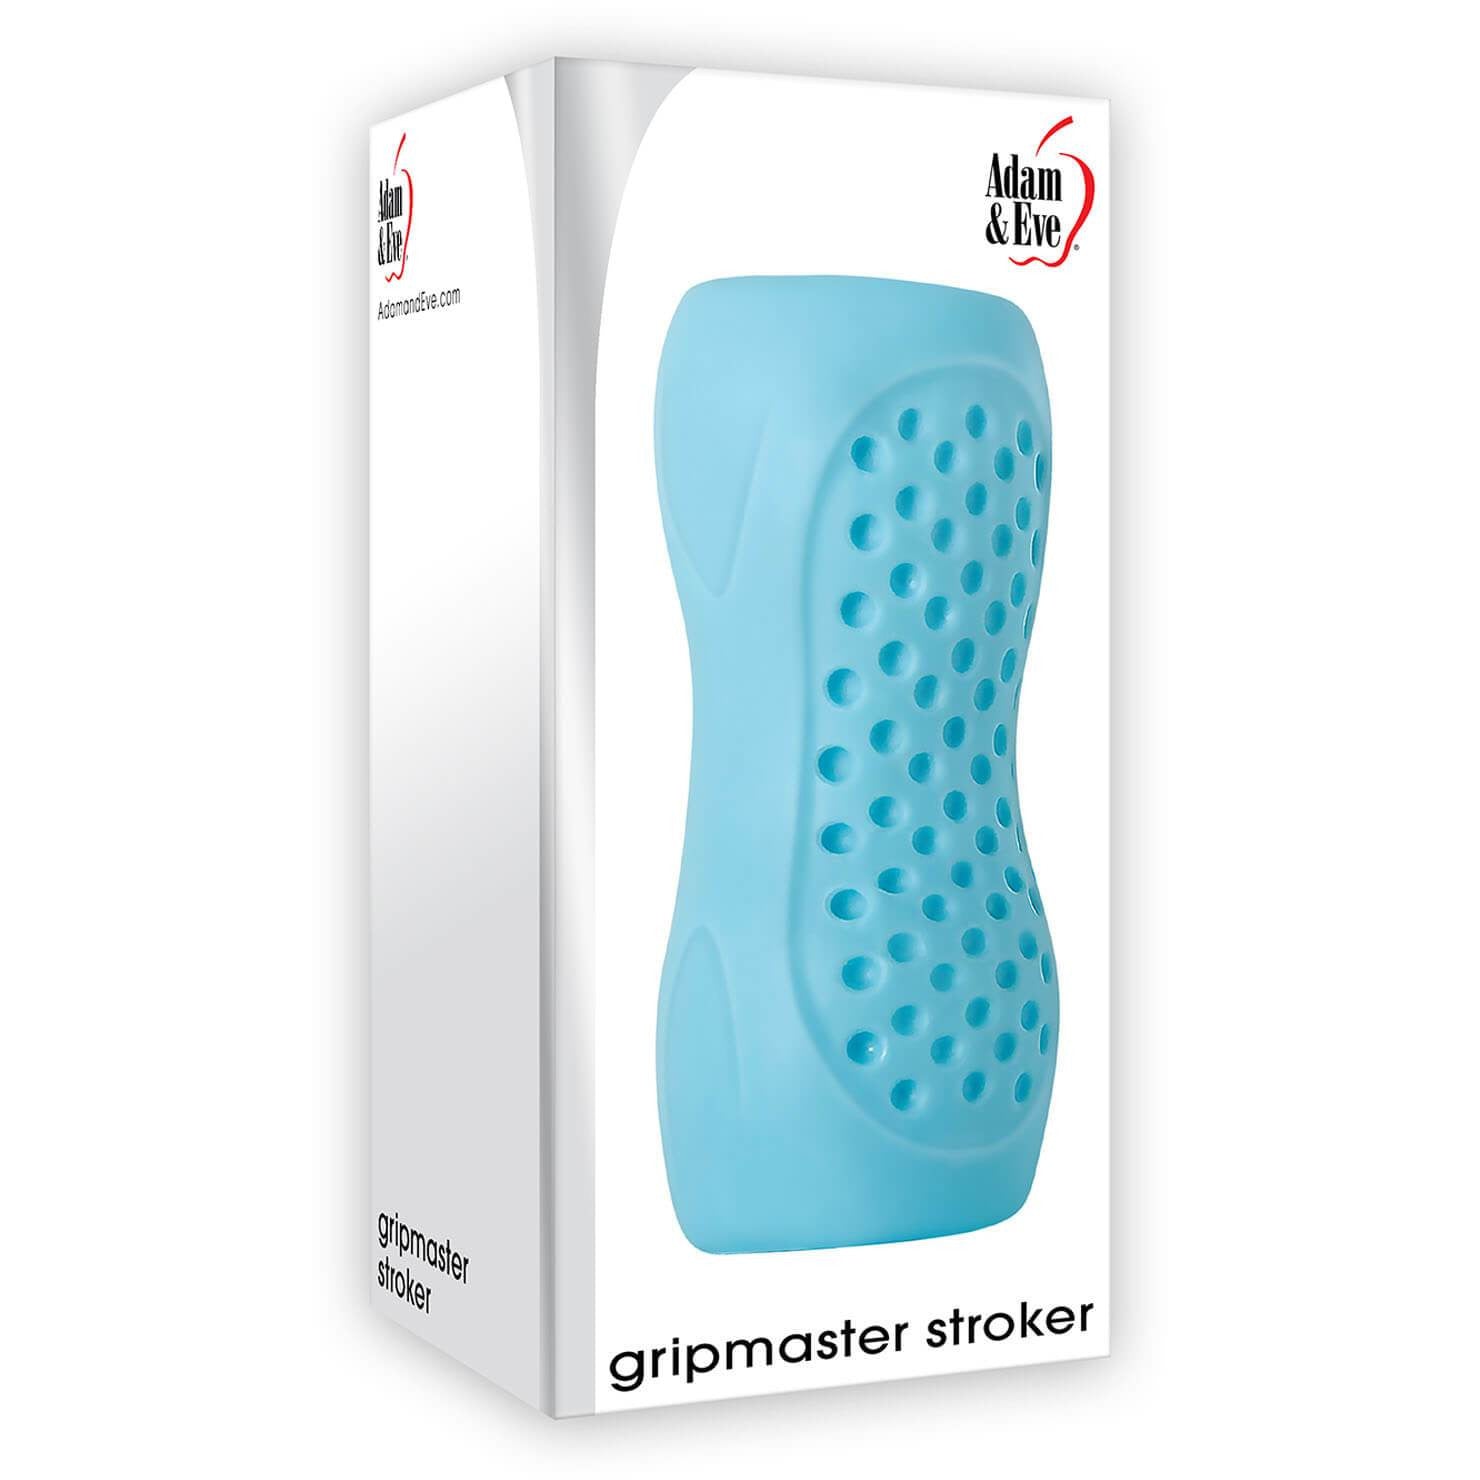 Gripmaster Stroker - by The Bigger O - online sex toy shop USA, Canada & UK shipping available